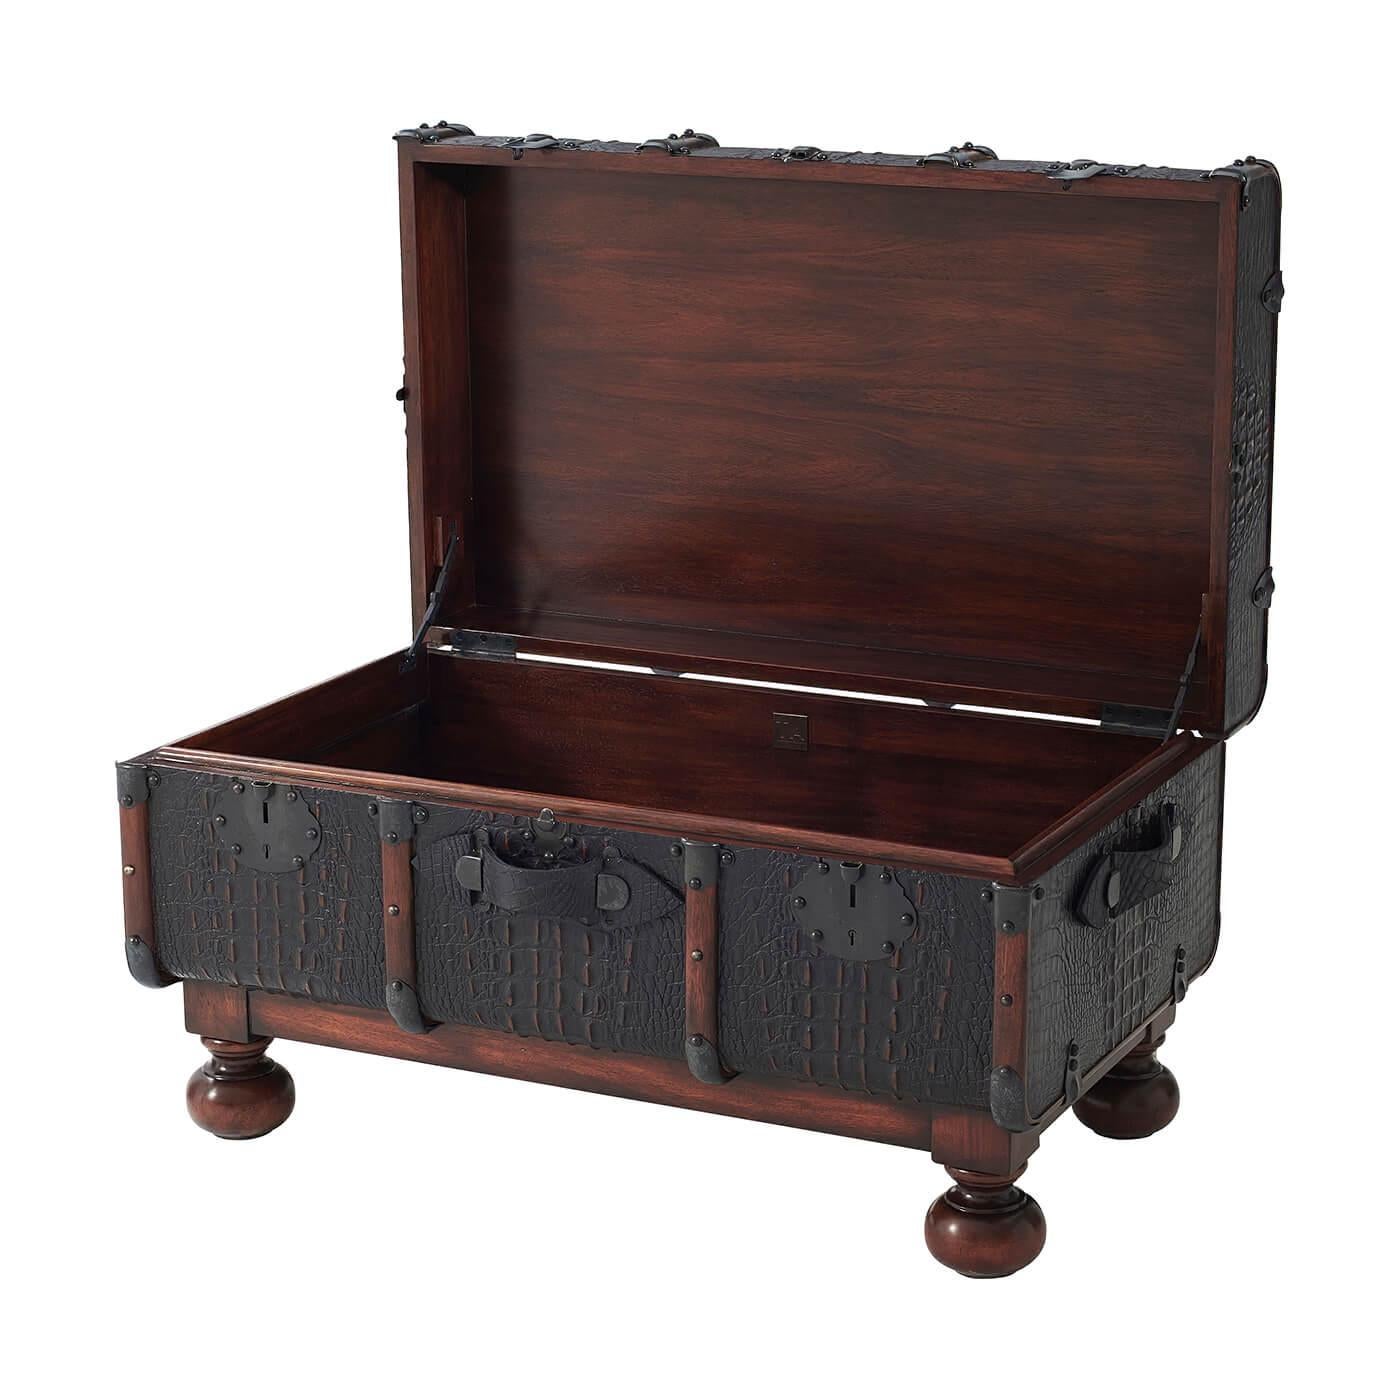 A Kalahari paneled steamer trunk with wooden and brass-mounted ribs, the hinged lid fixed with brass clasps on turned bun feet. The original circa 1920.

Dimensions: 33.75